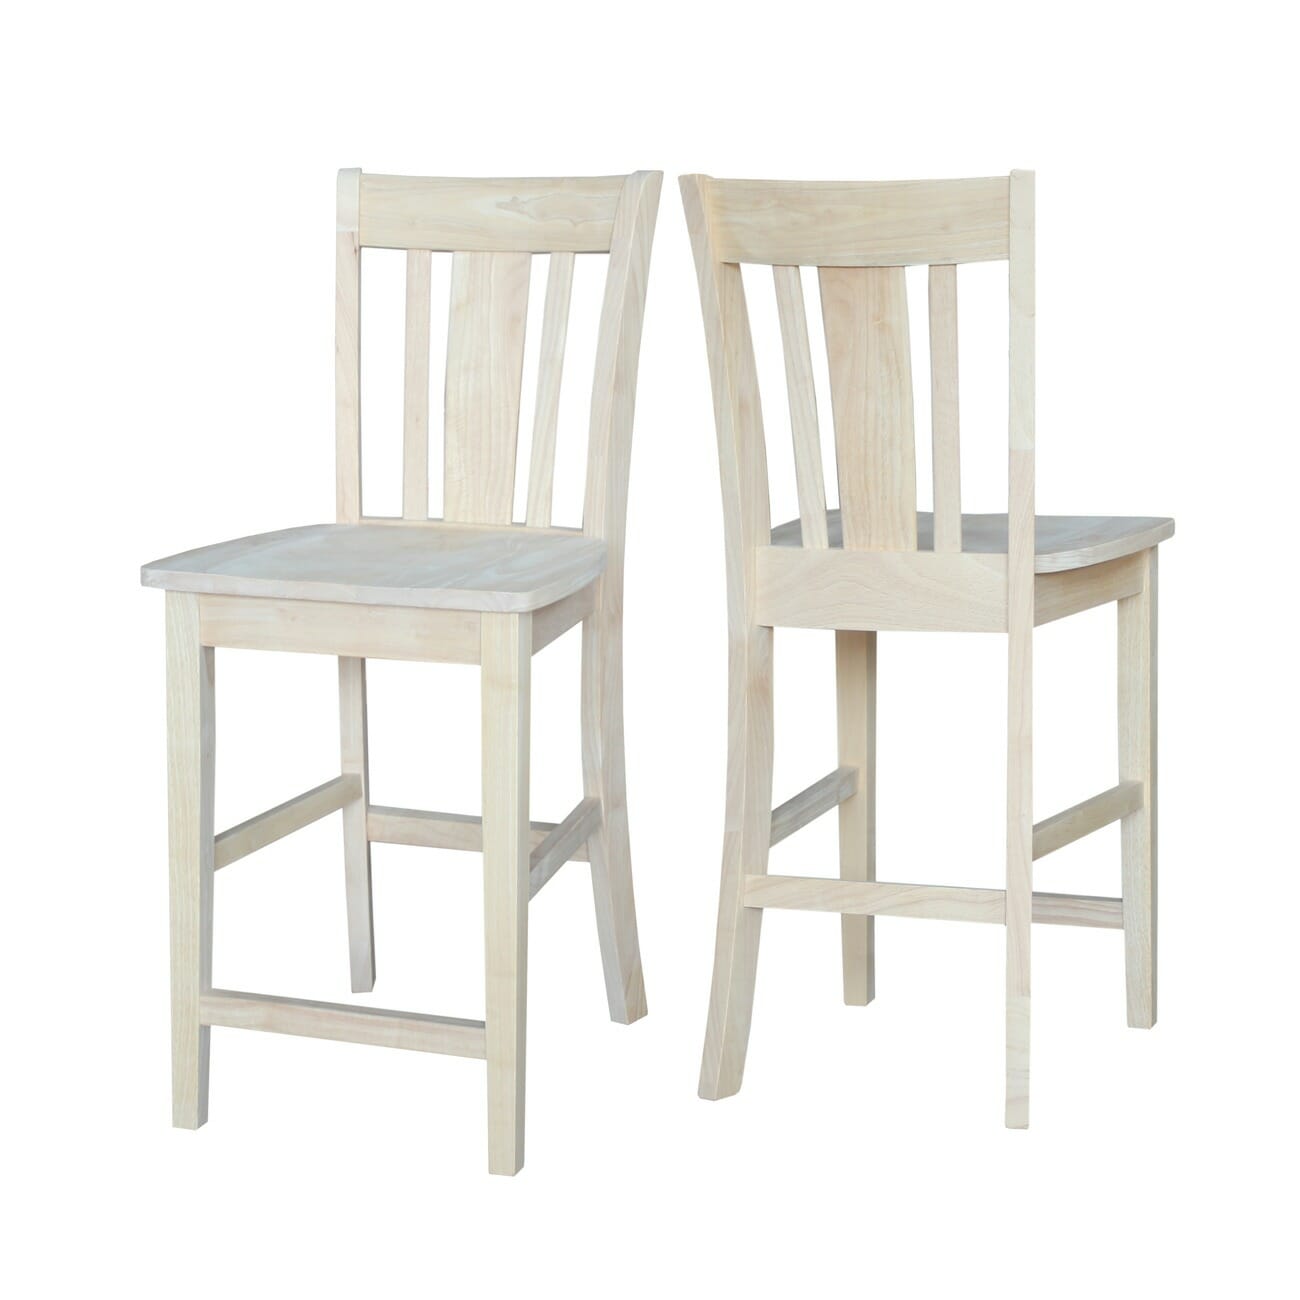 S-102 San Remo Counterstool w/FREE SHIPPING 3